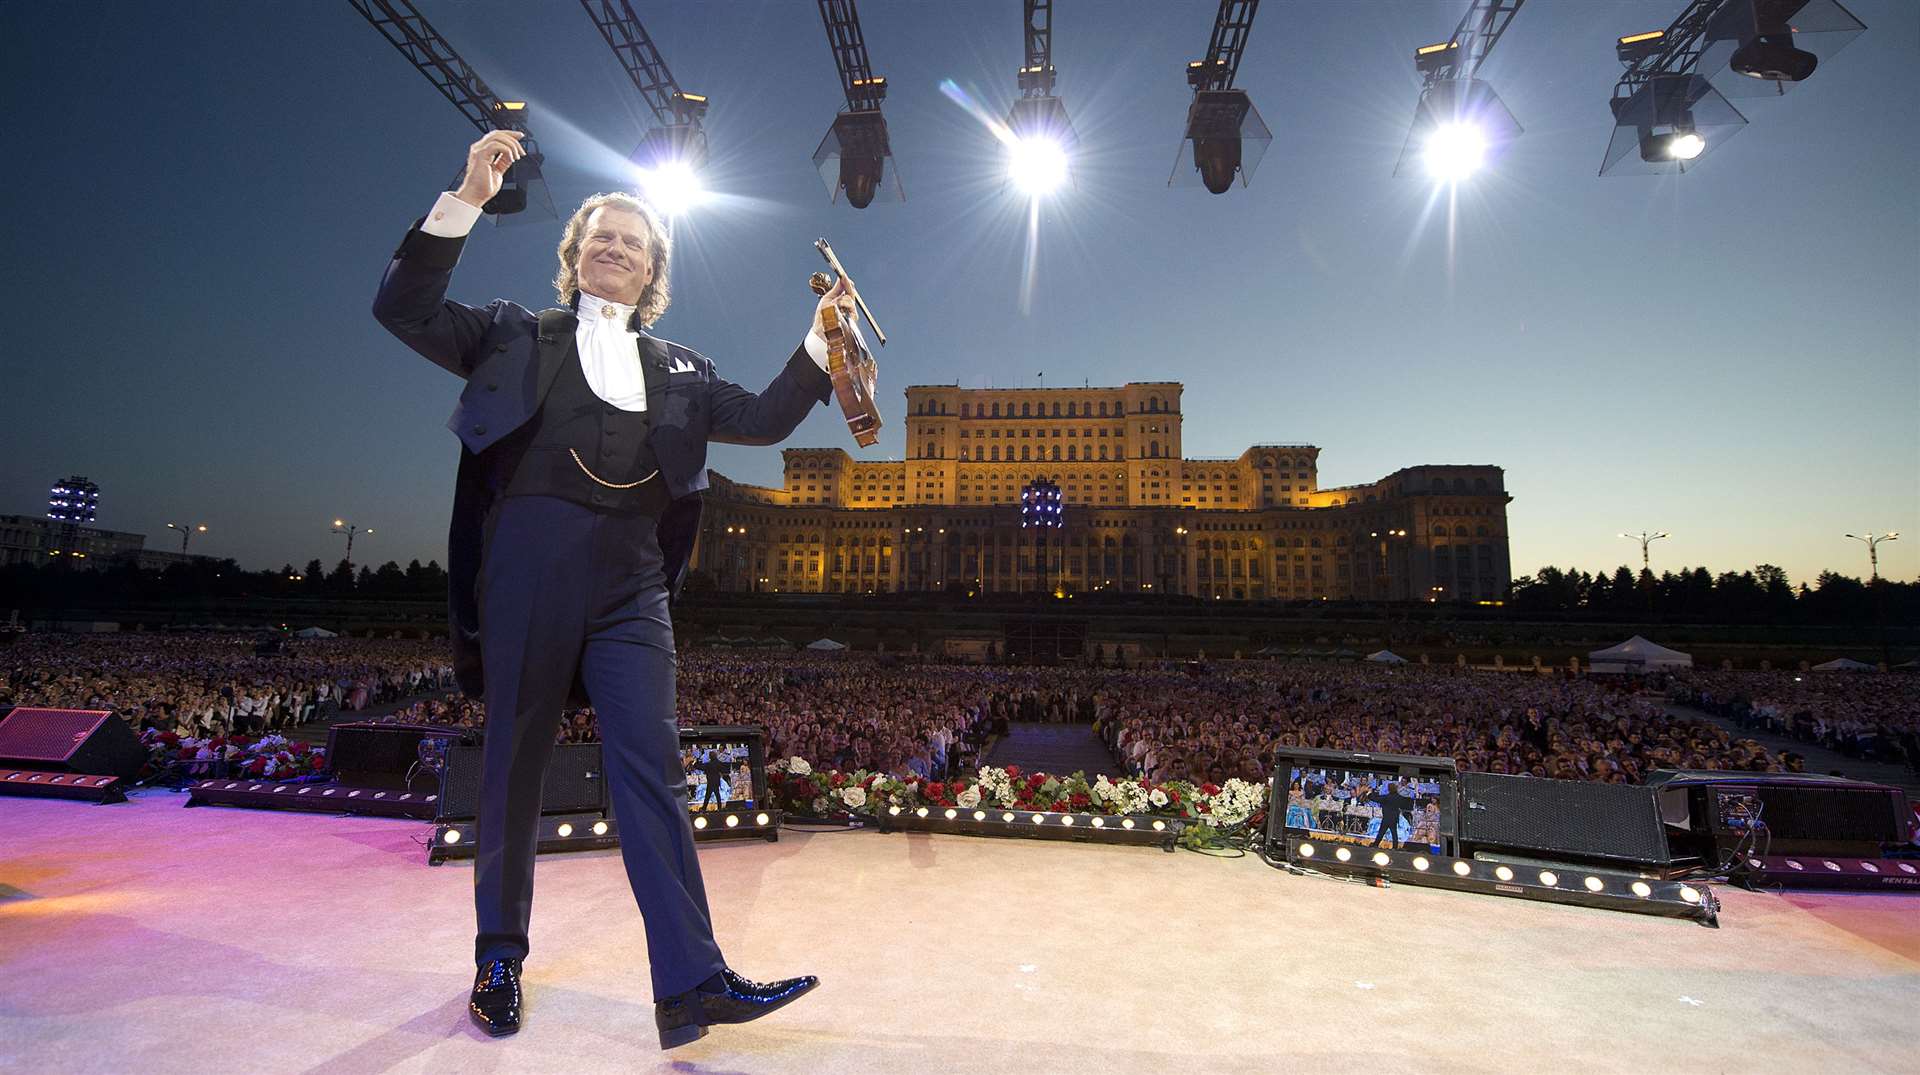 Andre has been dubbed the King of the Waltz Picture: Marcel van Hoorn/Andre Rieu Productions